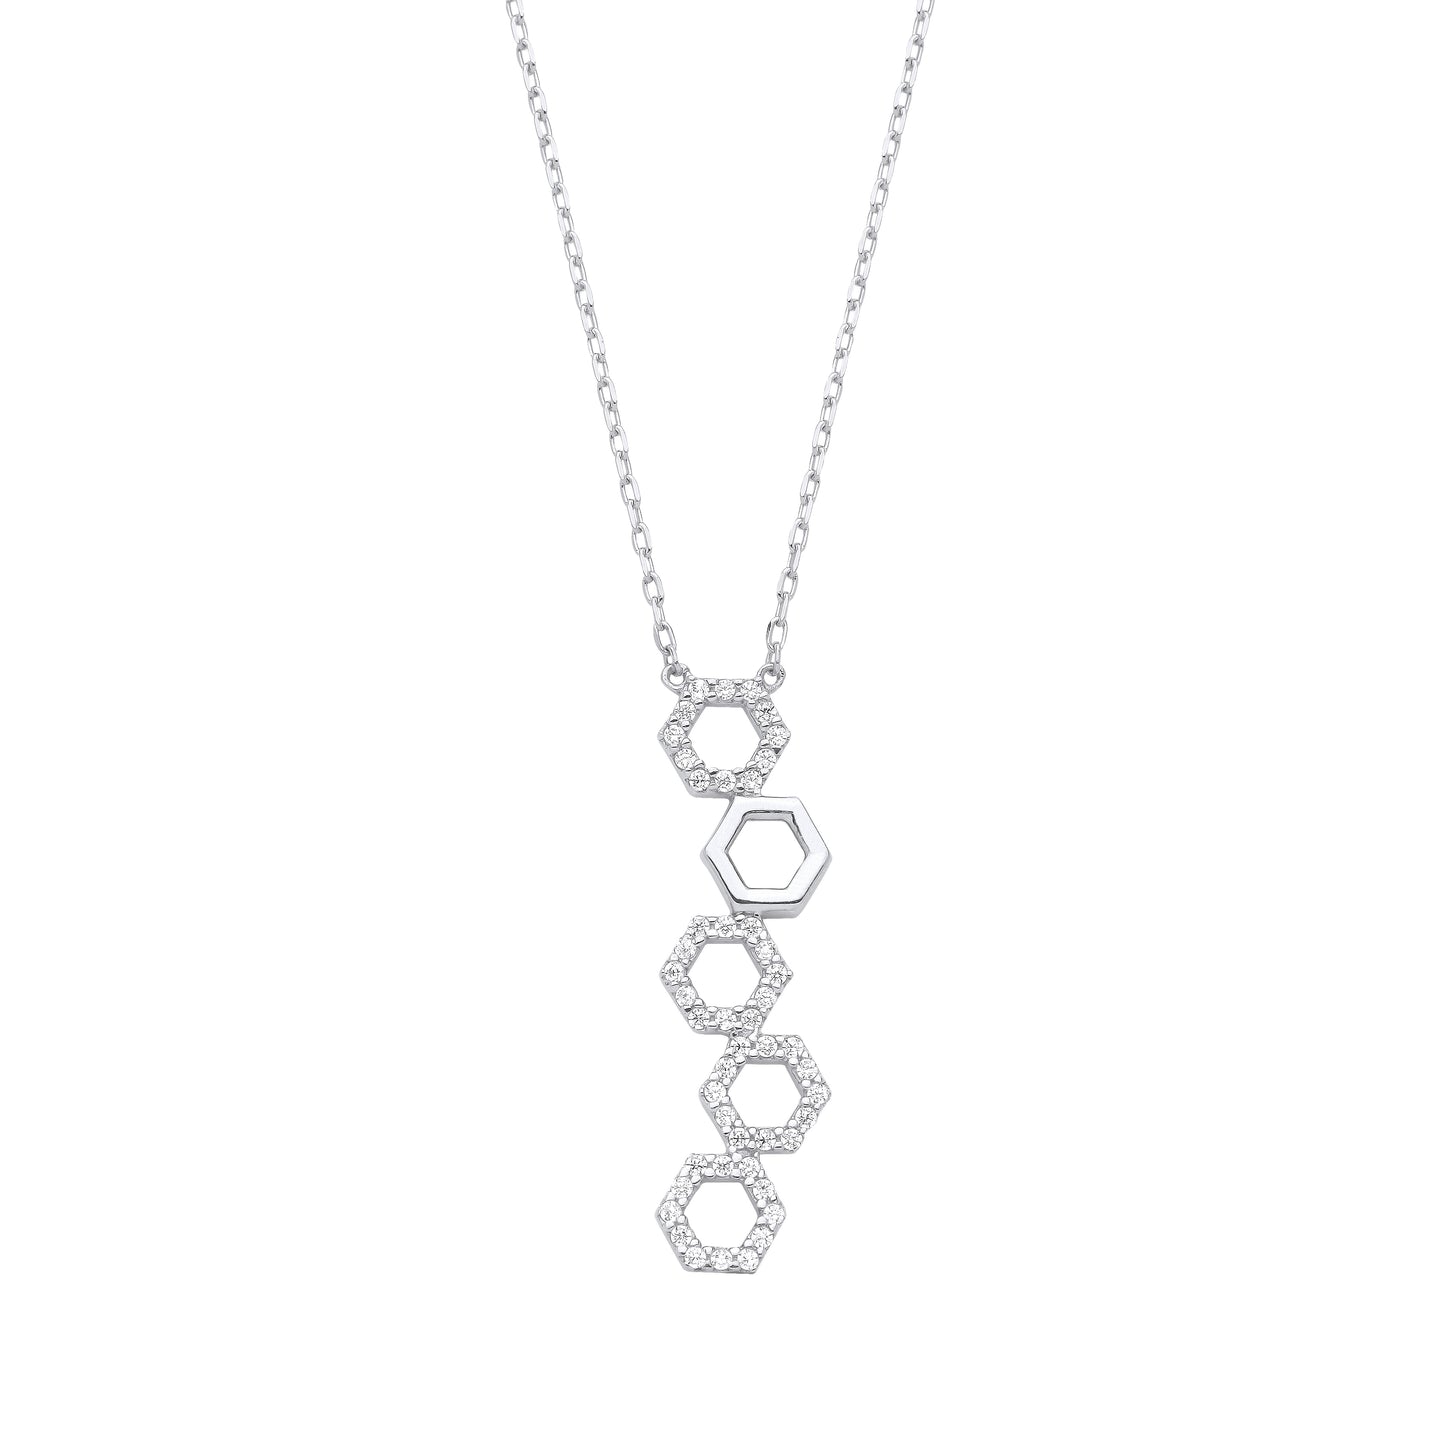 Silver  SheshBesh 5 Hexagons Lavalier Necklace - GVK391